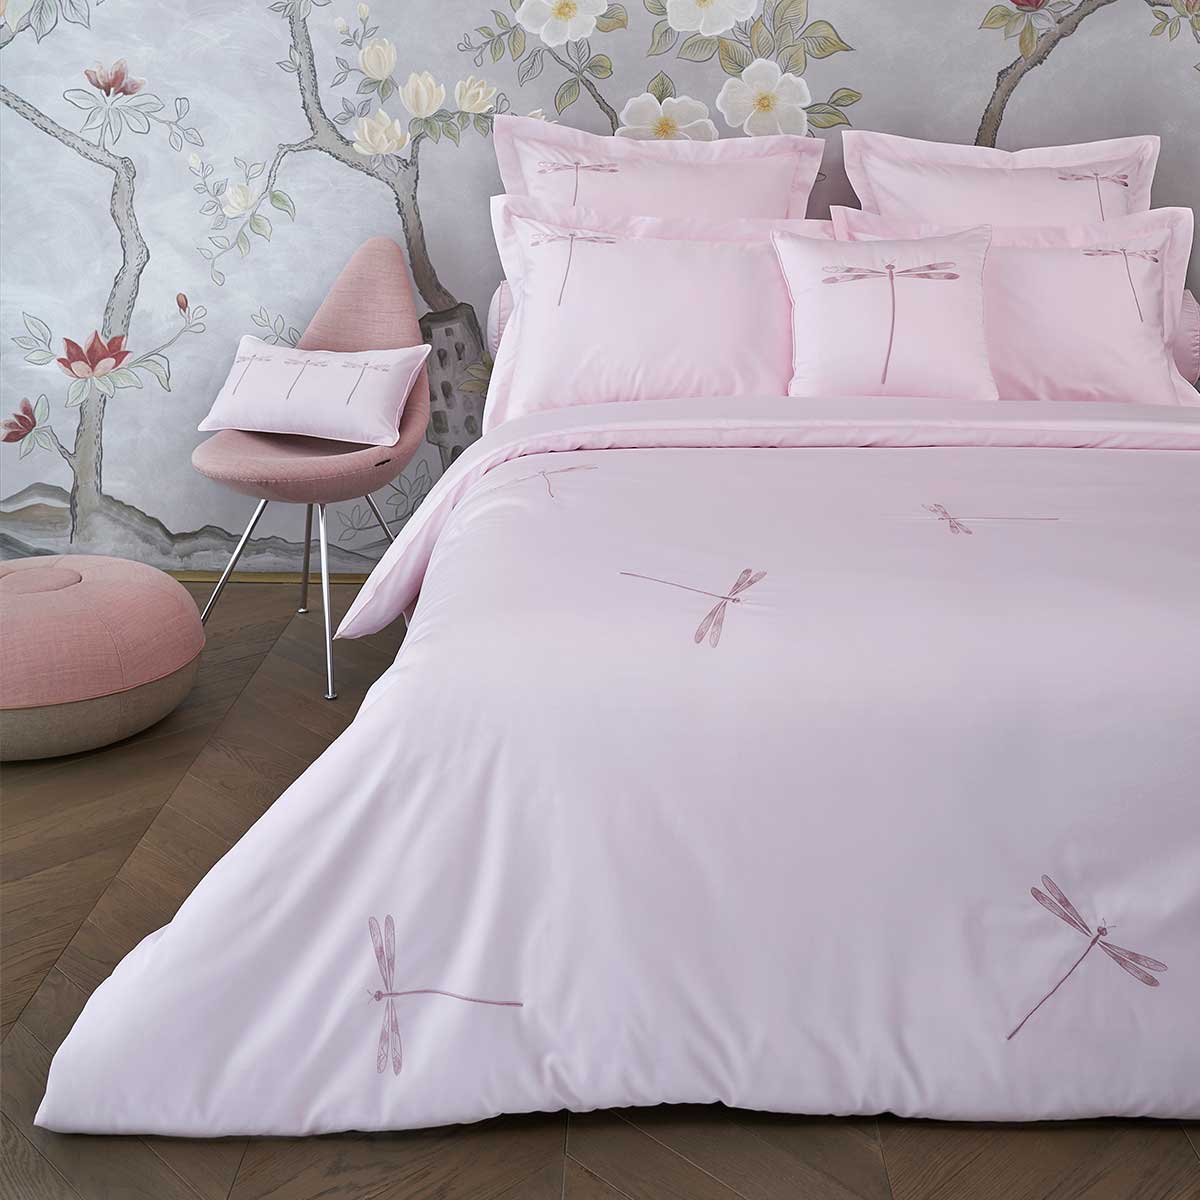 dragonfly duvet cover paradise pink